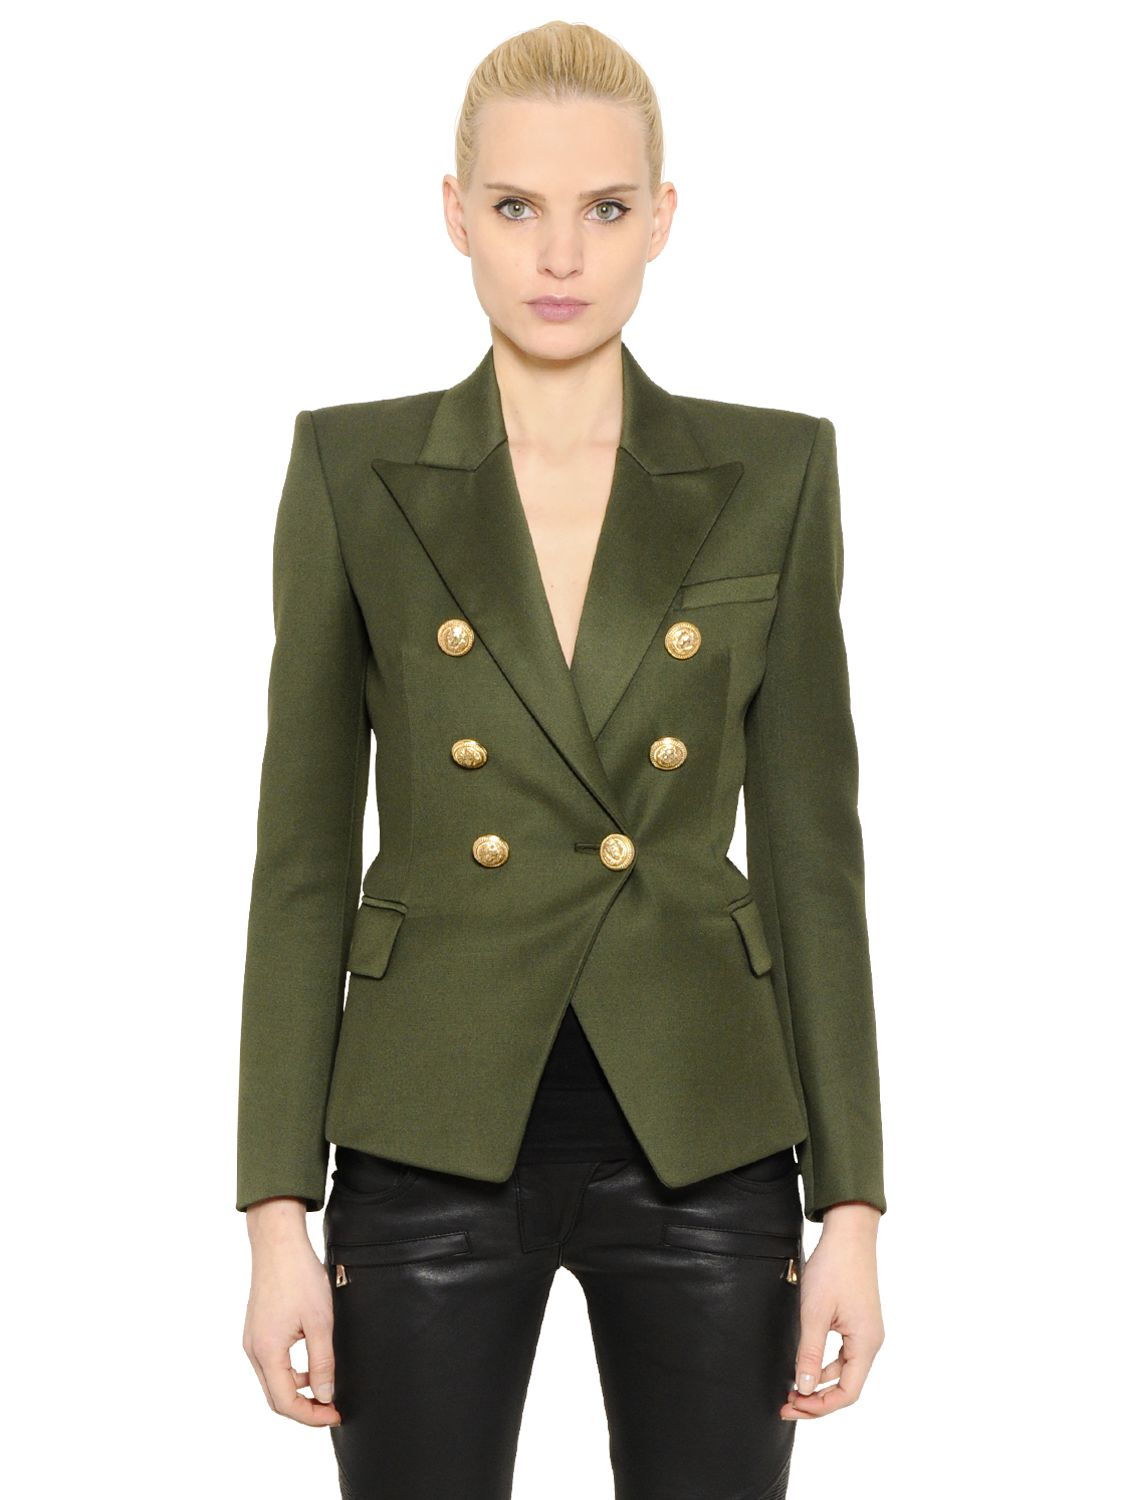 Lyst - Balmain Double Breasted Wool Twill Jacket in Natural